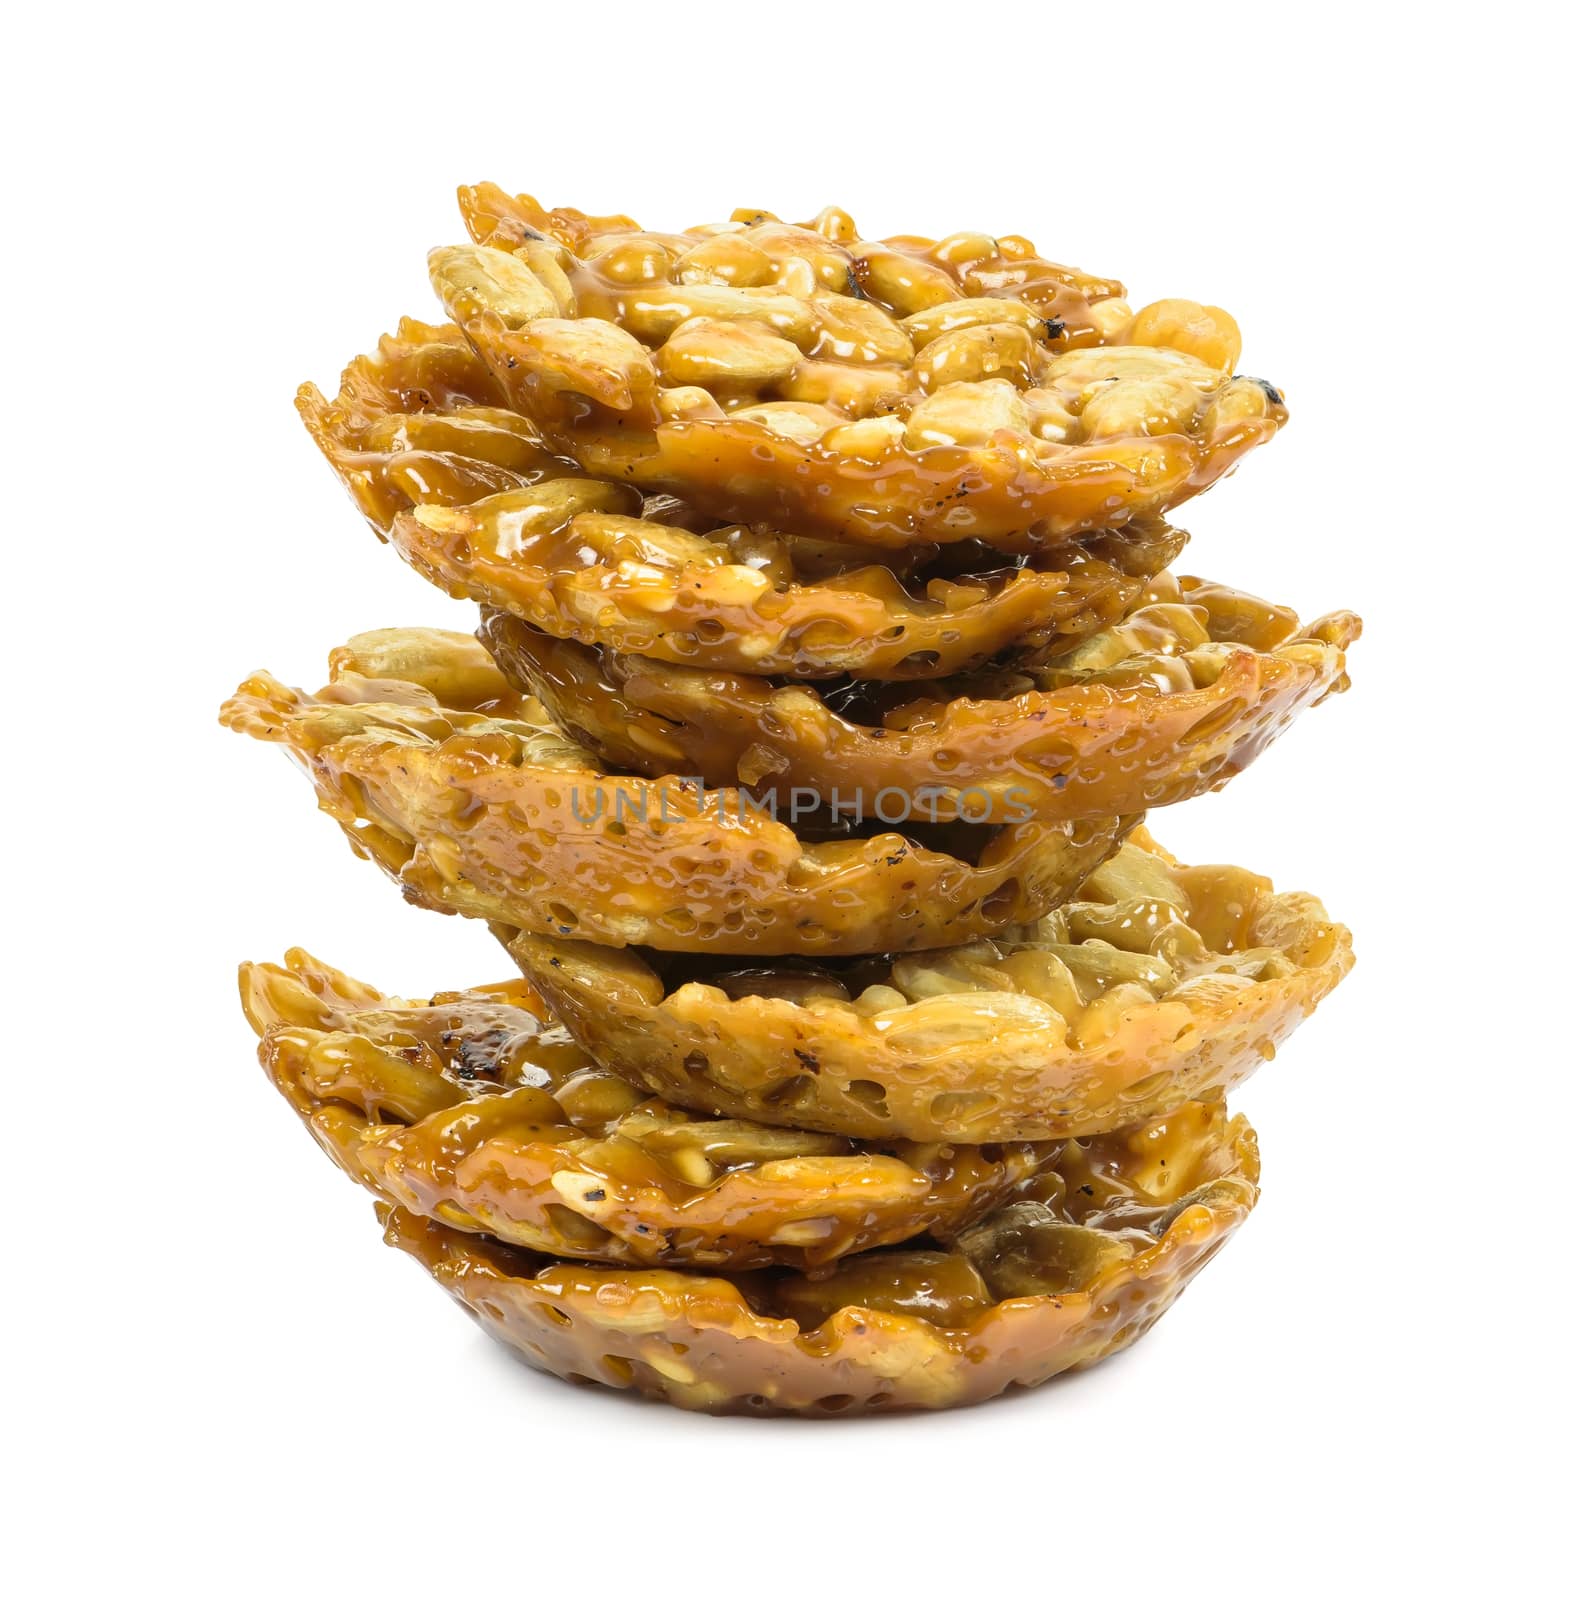 Stack of florentine biscuits on white background by mkos83